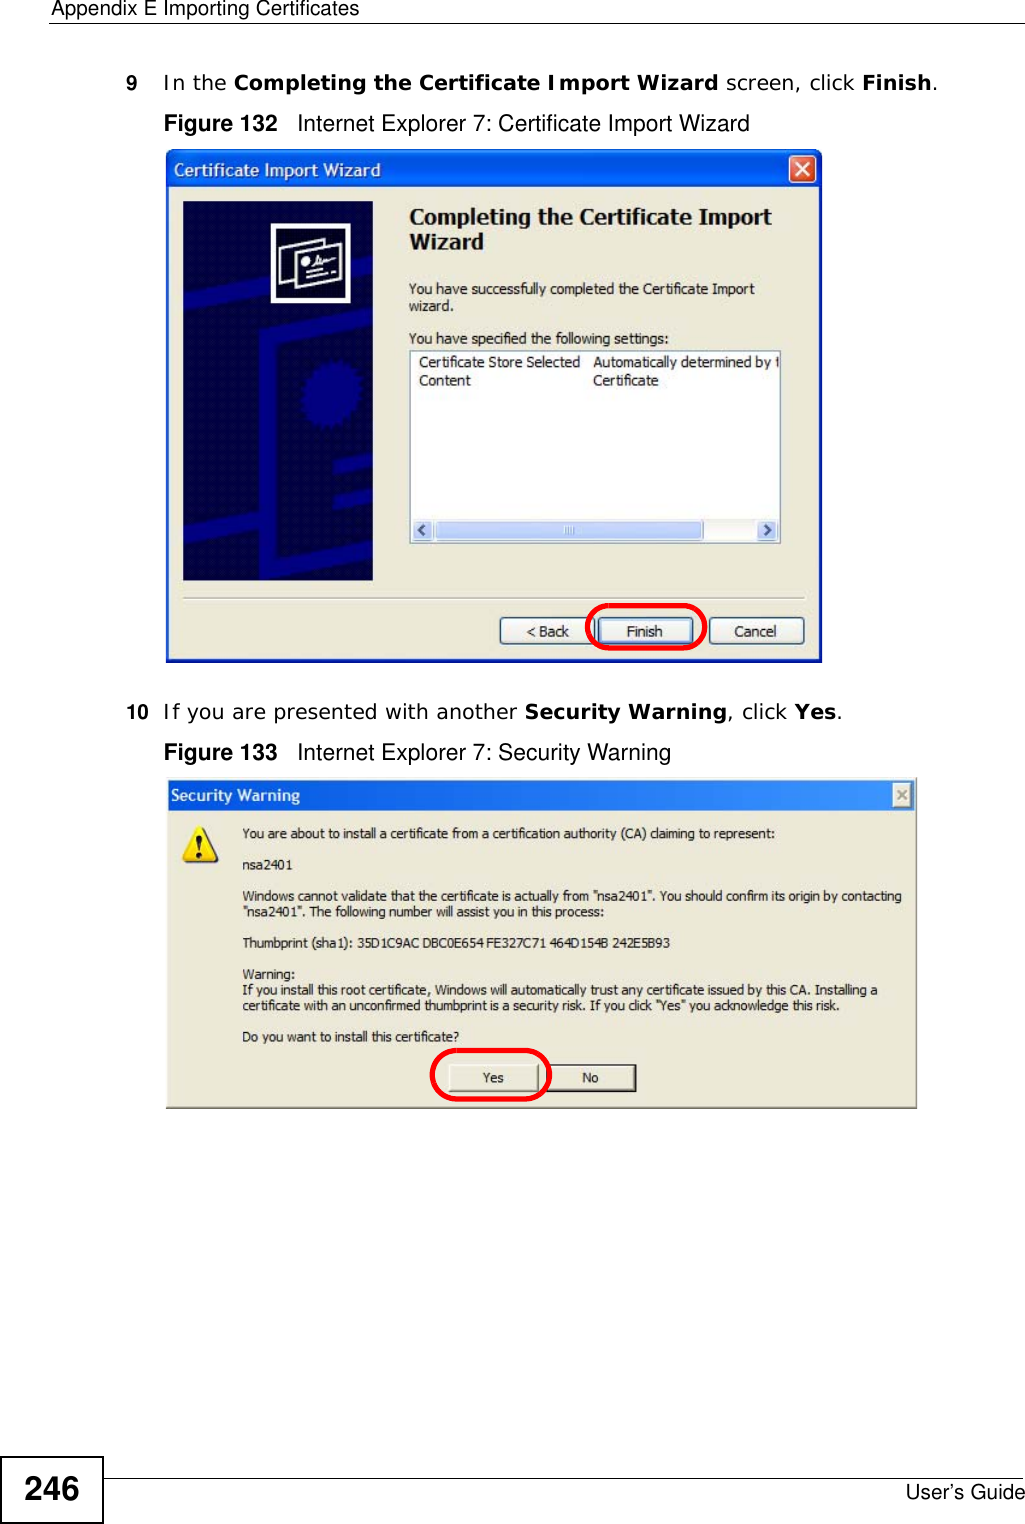 Appendix E Importing CertificatesUser’s Guide2469In the Completing the Certificate Import Wizard screen, click Finish.Figure 132   Internet Explorer 7: Certificate Import Wizard10 If you are presented with another Security Warning, click Yes.Figure 133   Internet Explorer 7: Security Warning